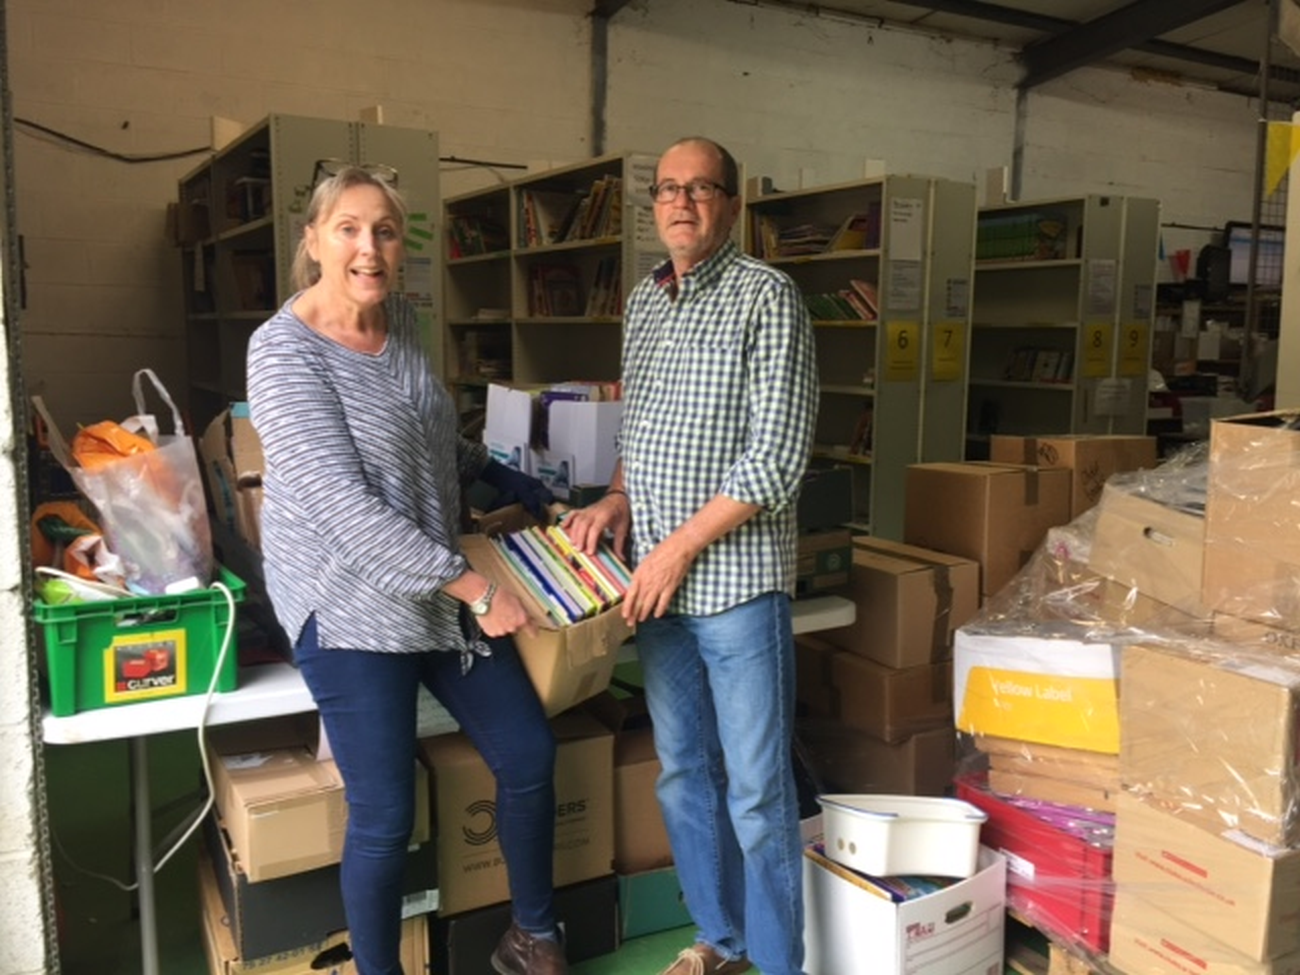 Clare Junak receives book donation from Peter Dobson